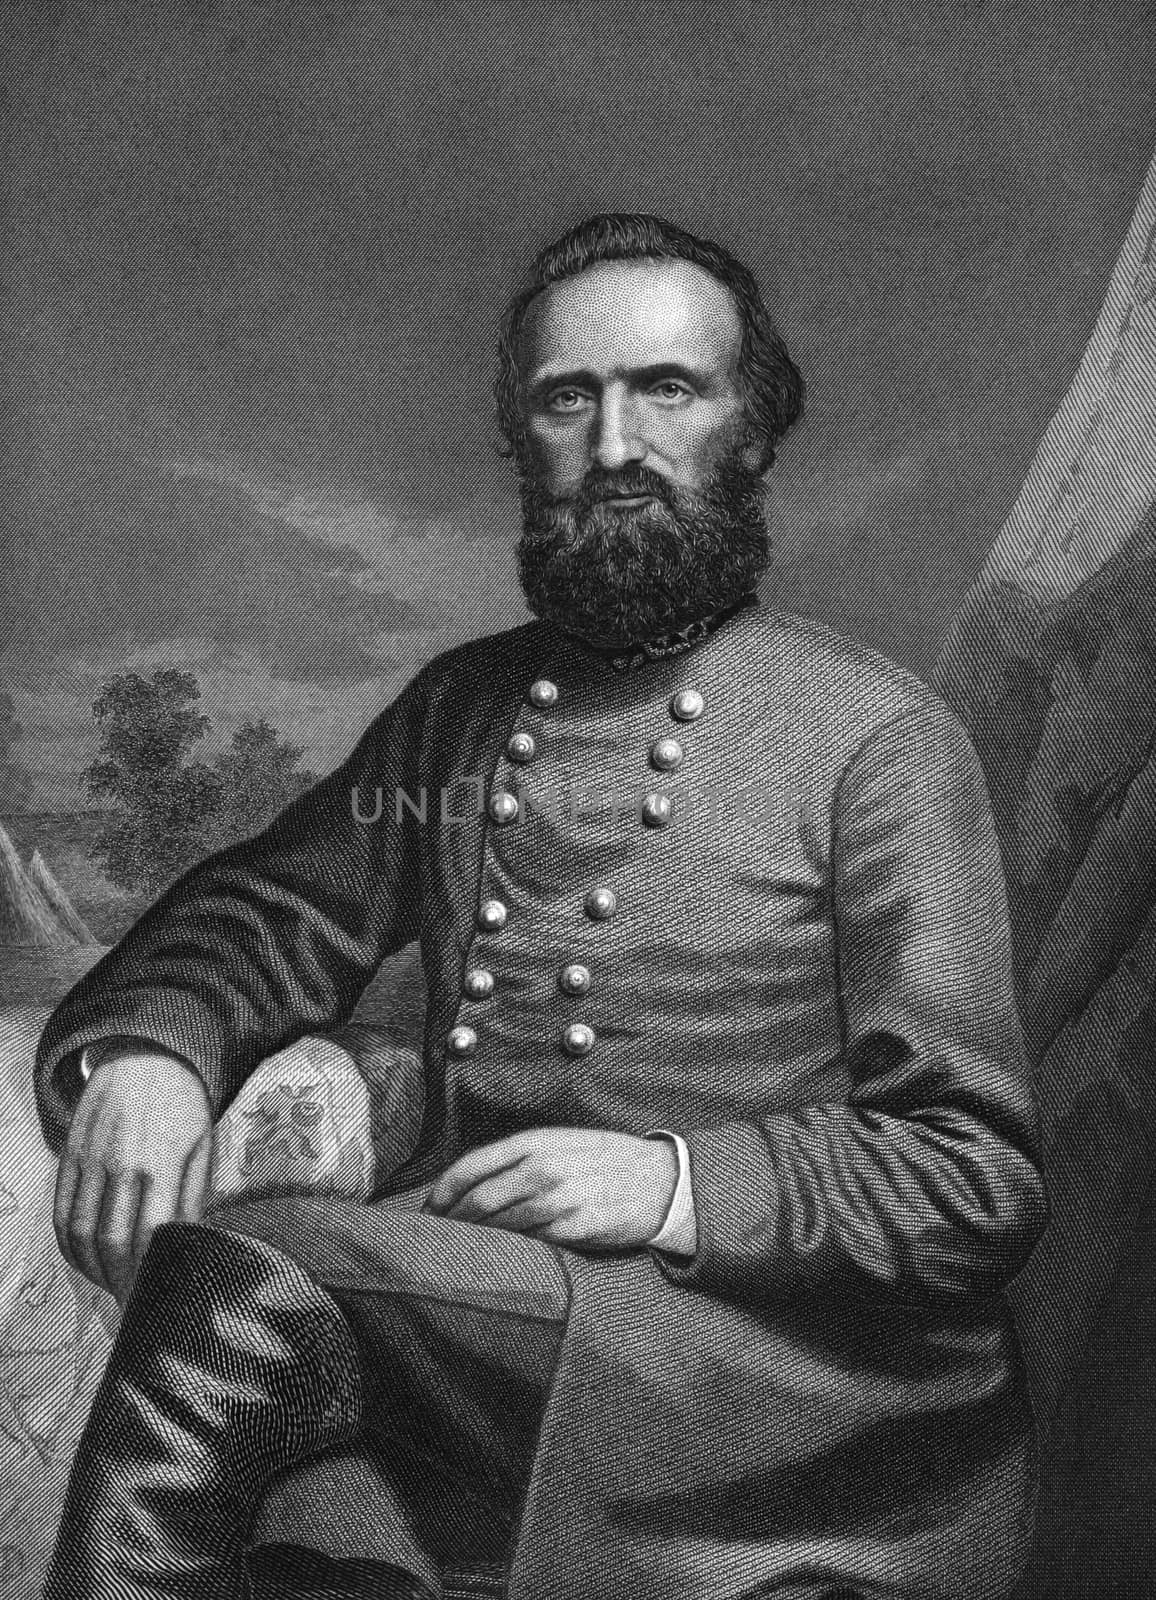 Thomas Jonathan "Stonewall" Jackson (1824-1863) on engraving from 1873. One of the best known Confederate generals during the American Civil War. Engraved by unknown artist and published in ''Portrait Gallery of Eminent Men and Women with Biographies'',USA,1873.